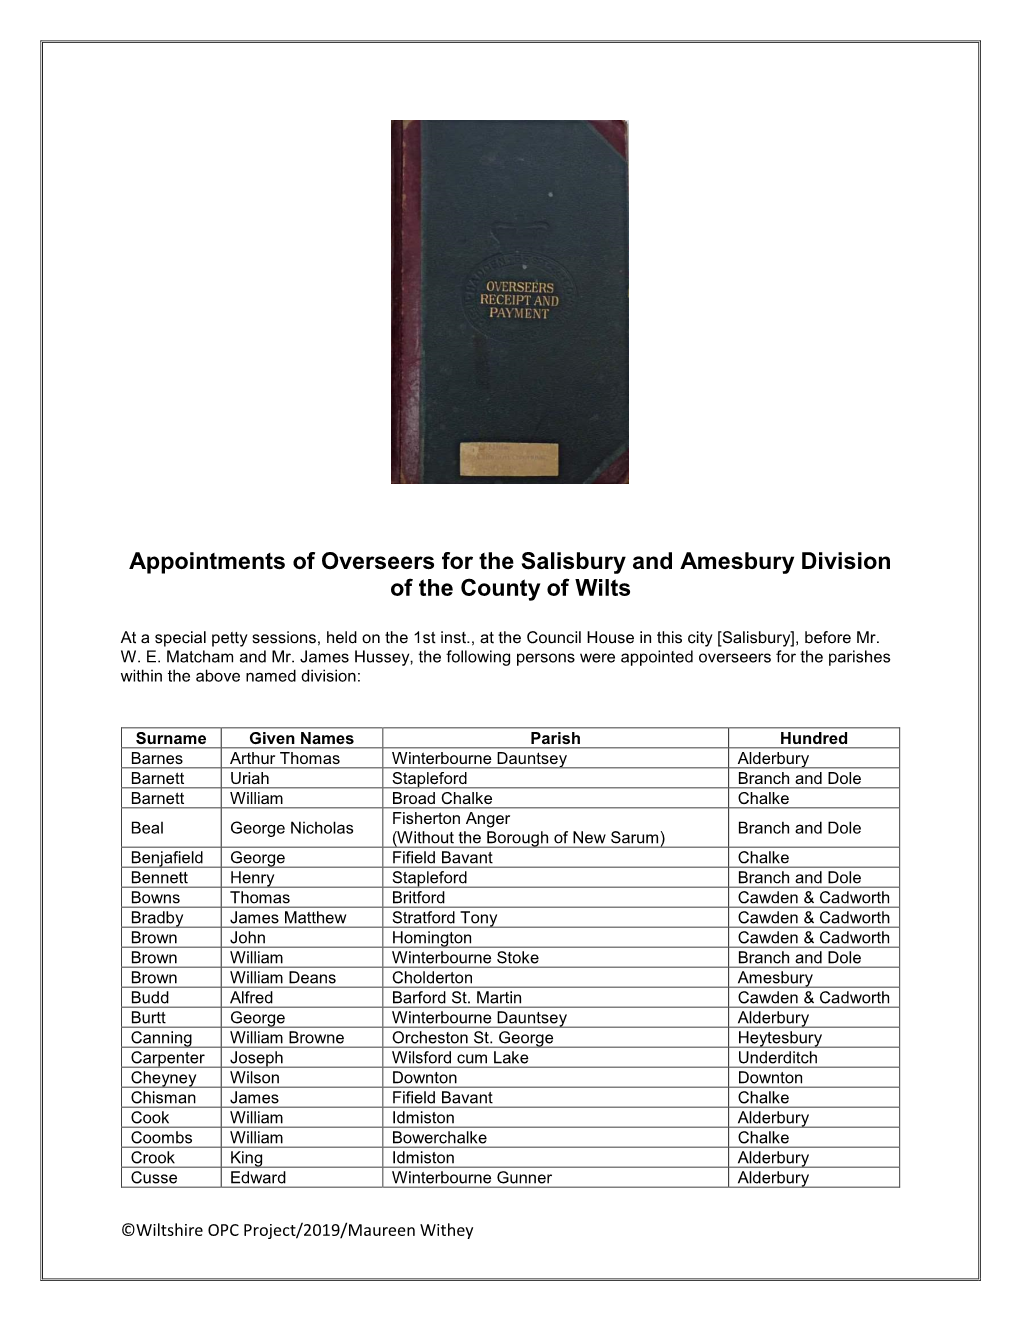 Appointments of Overseers for the Salisbury and Amesbury Division of the County of Wilts